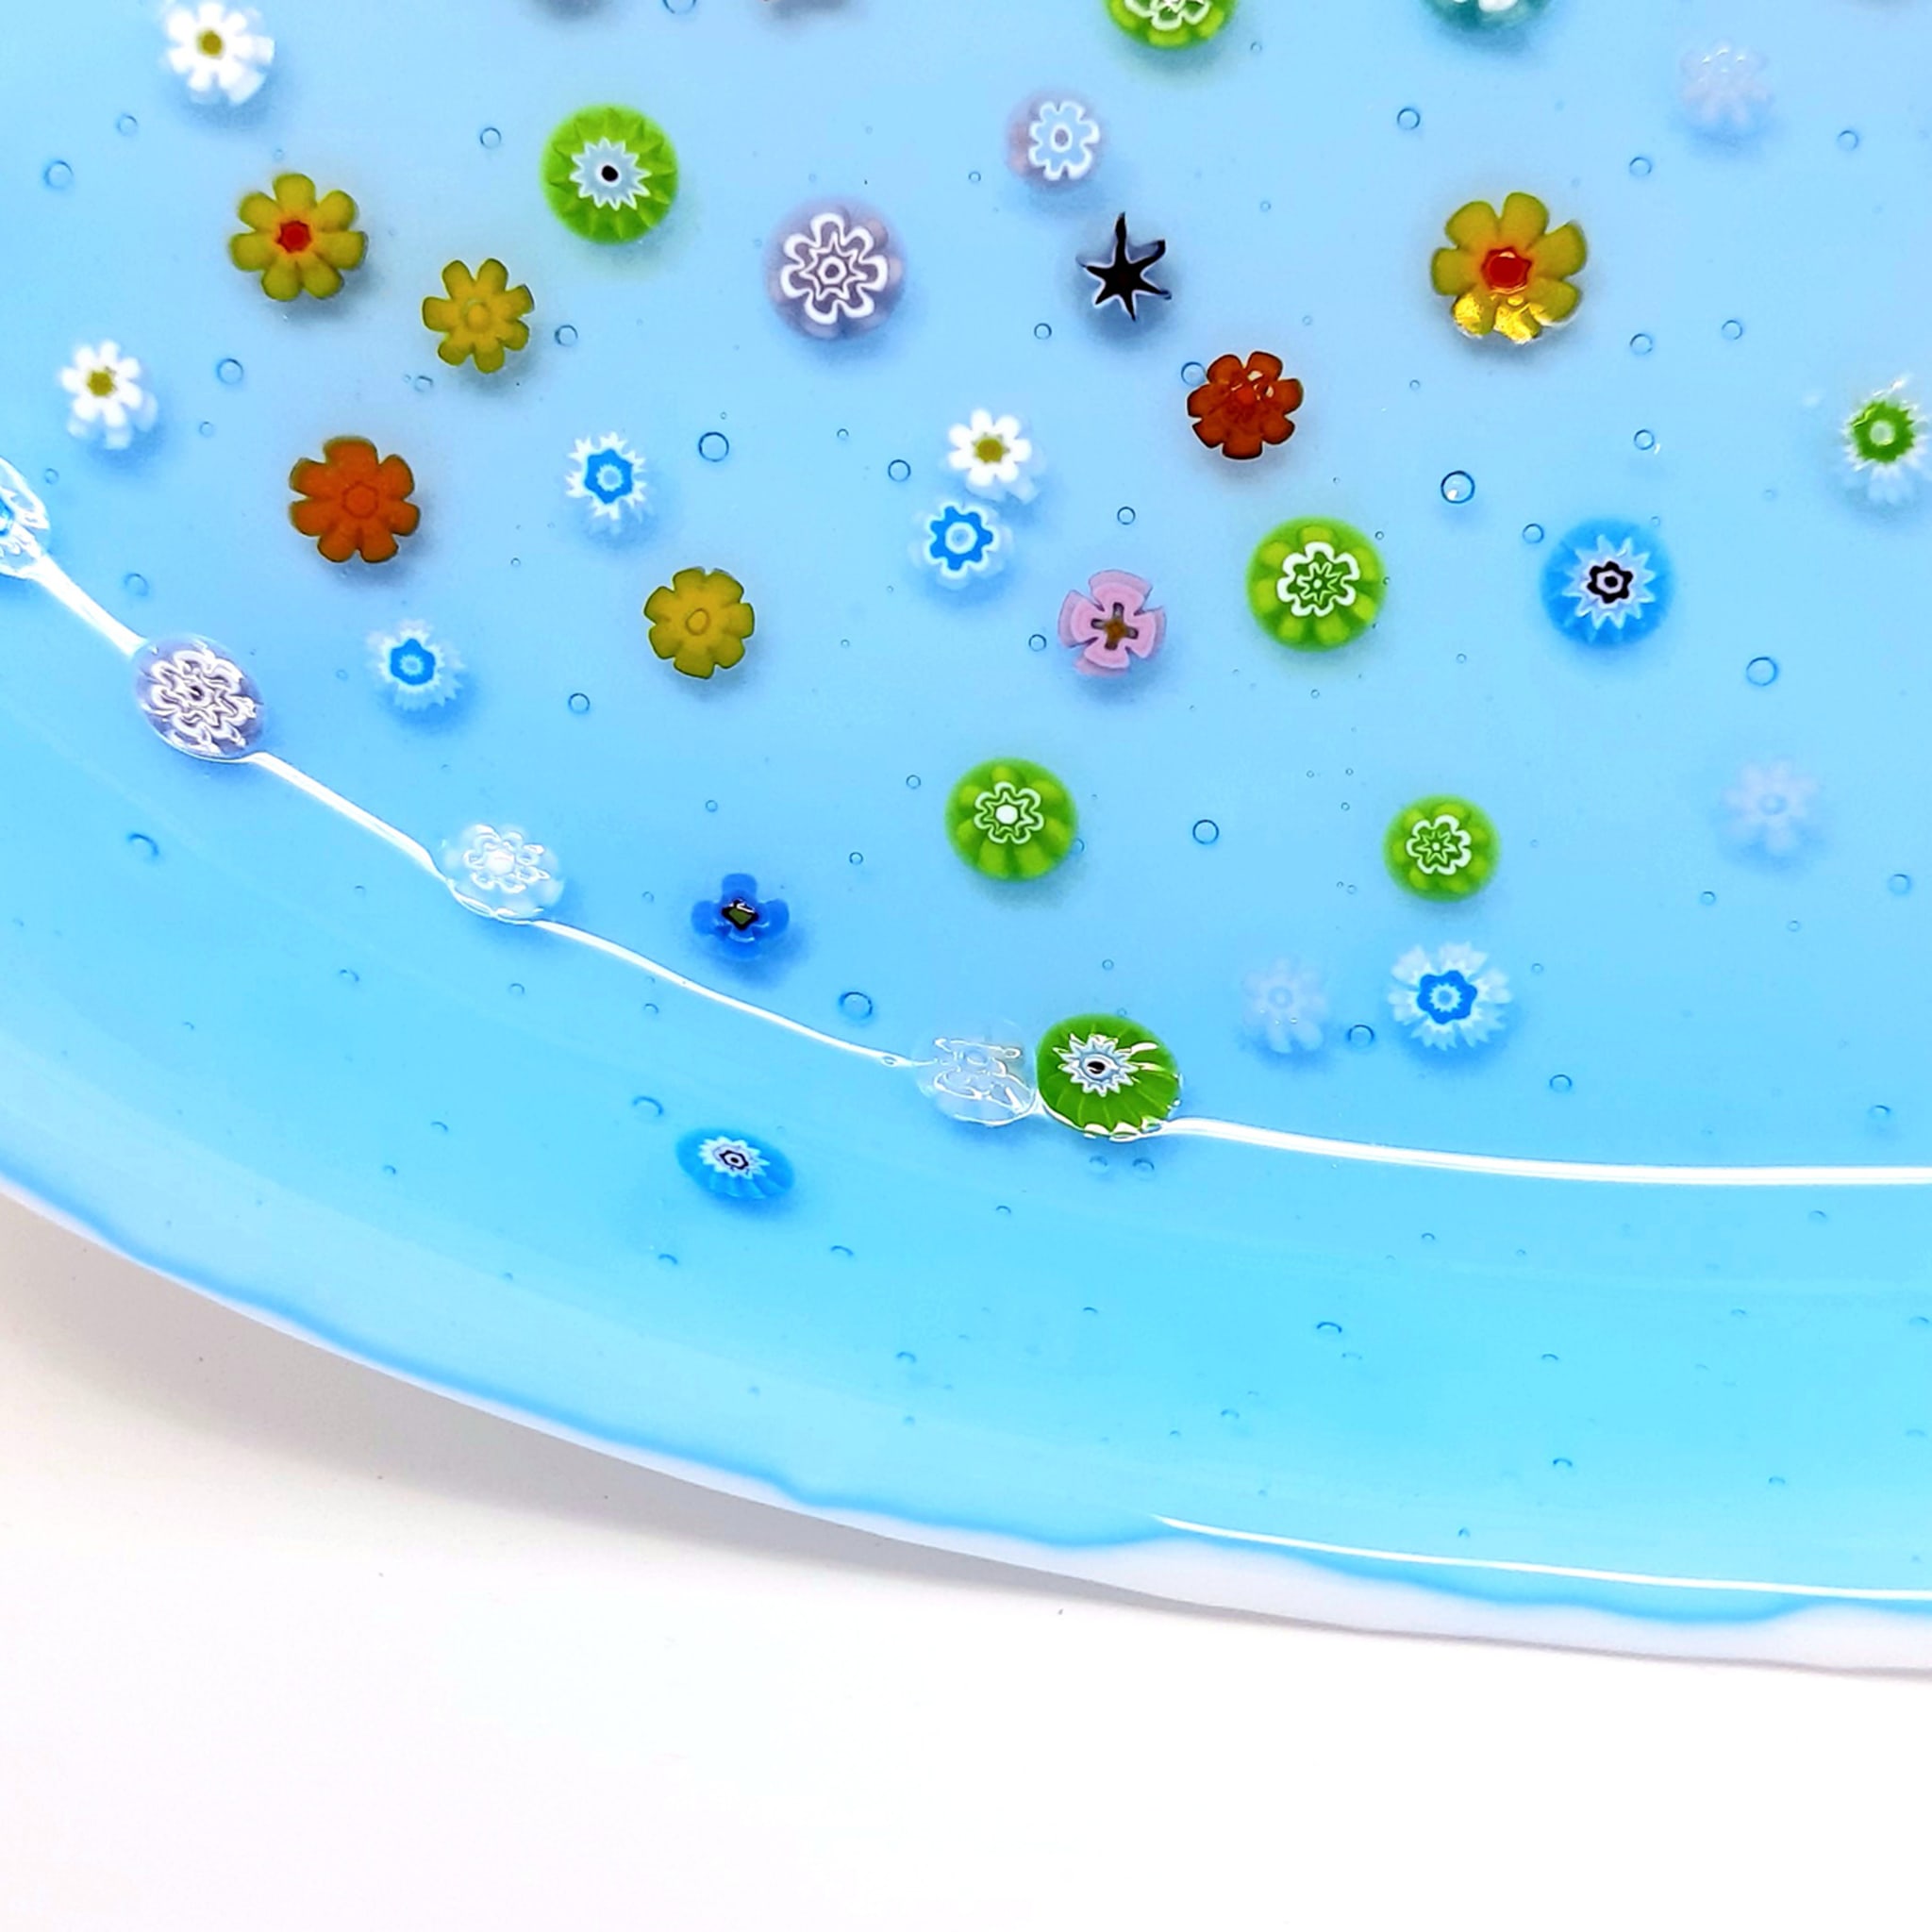 Turquoise Glass Serving Platter with Floral Murrini Inlays  - Alternative view 2